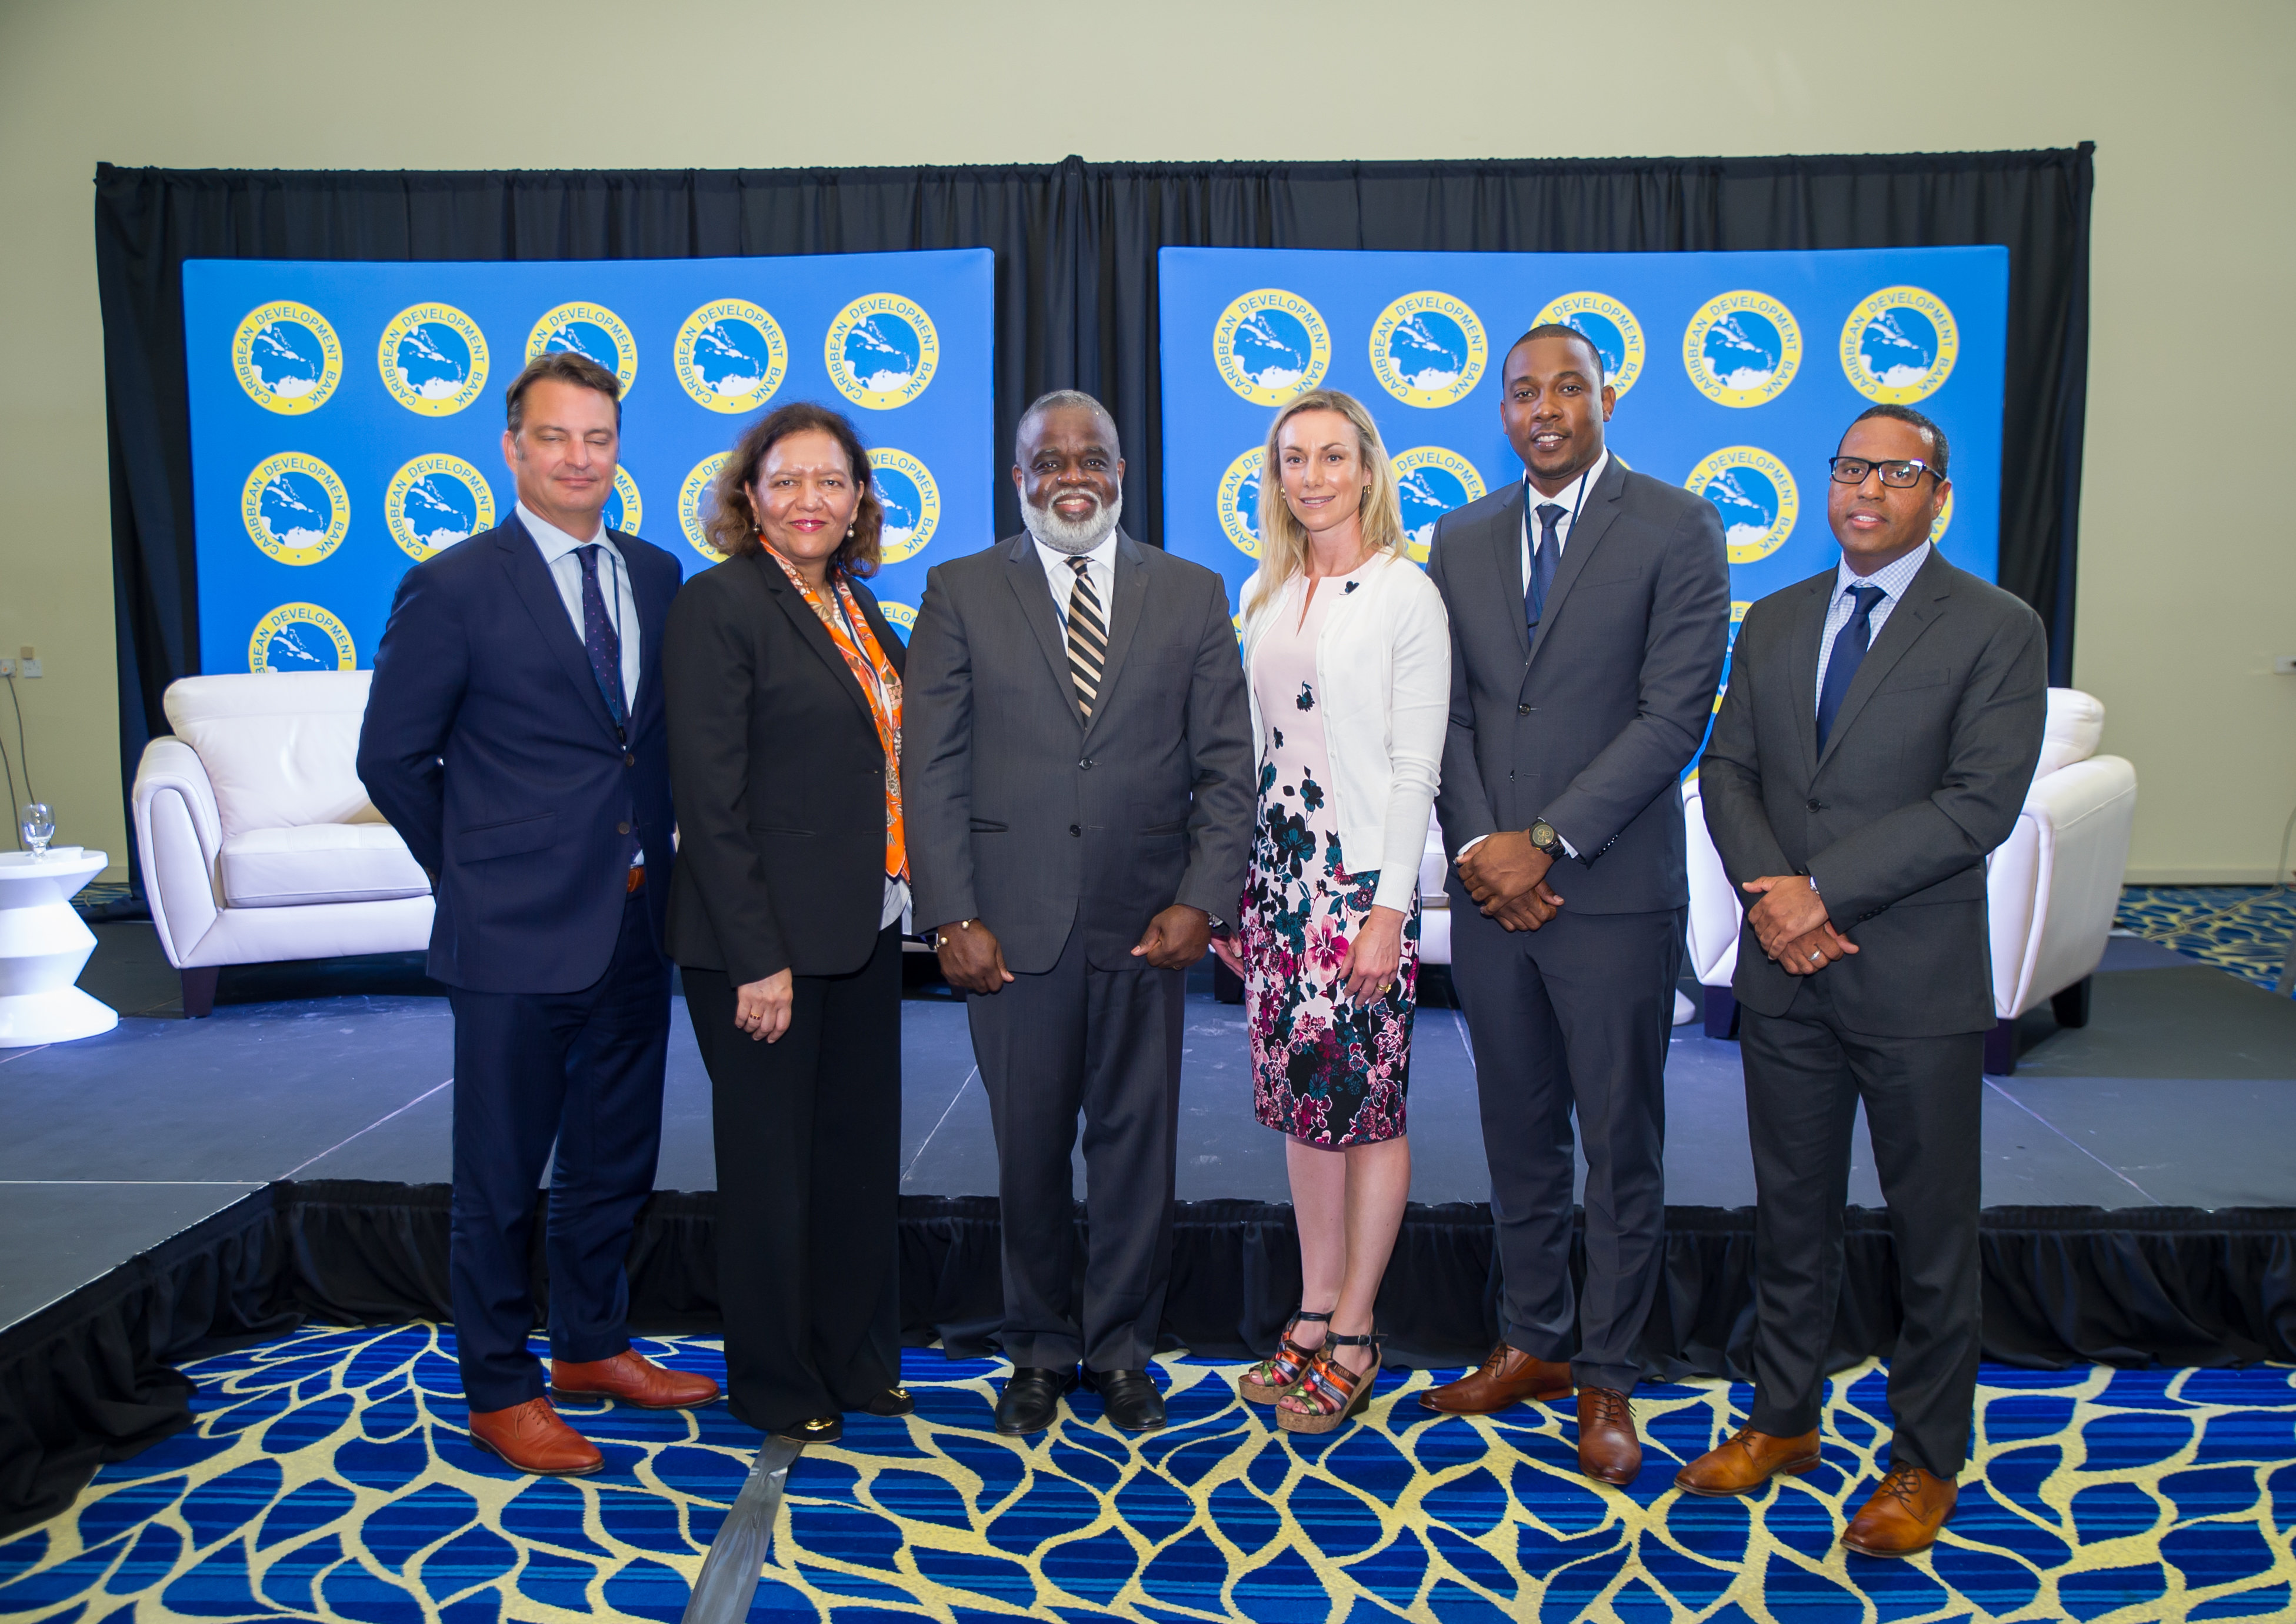 (L-R): Robert Weary, Senior Director, NatureVest, the Nature Conservancy; Tahseen Sayed, Director for the Caribbean, World Bank; Dr. Eric Deans, Chief Executive Officer, Jamaica Special Economic Zone Authority, and Jamaica Logistics Hub Initiative Task Force; Gail Hurley, Development Finance Policy Specialist, UNDP; Presenter, Dr. Roger McLeod, Country Economist, CDB; and Dr. Justin Ram, Director, Economics Department, CDB.